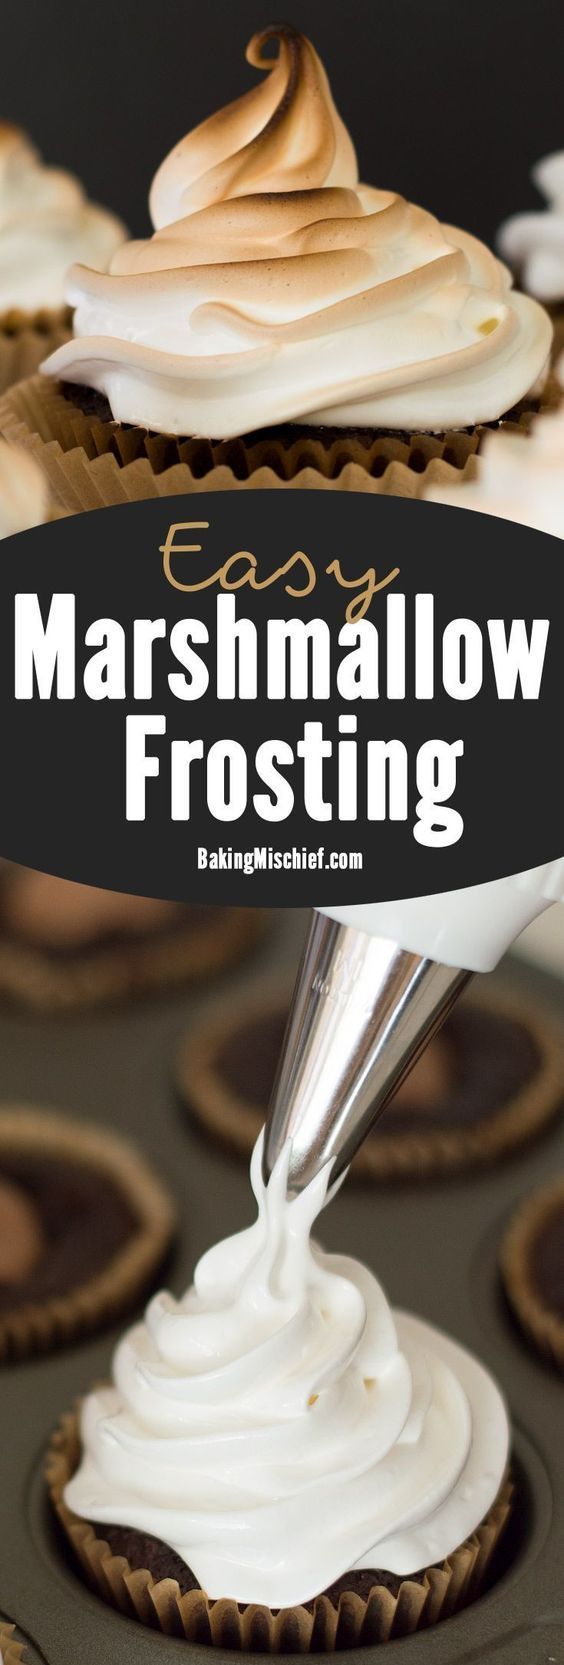 Light and fluffy marshmallow frosting. Delicious to eat and easy to make! Recipe includes nutritional information.